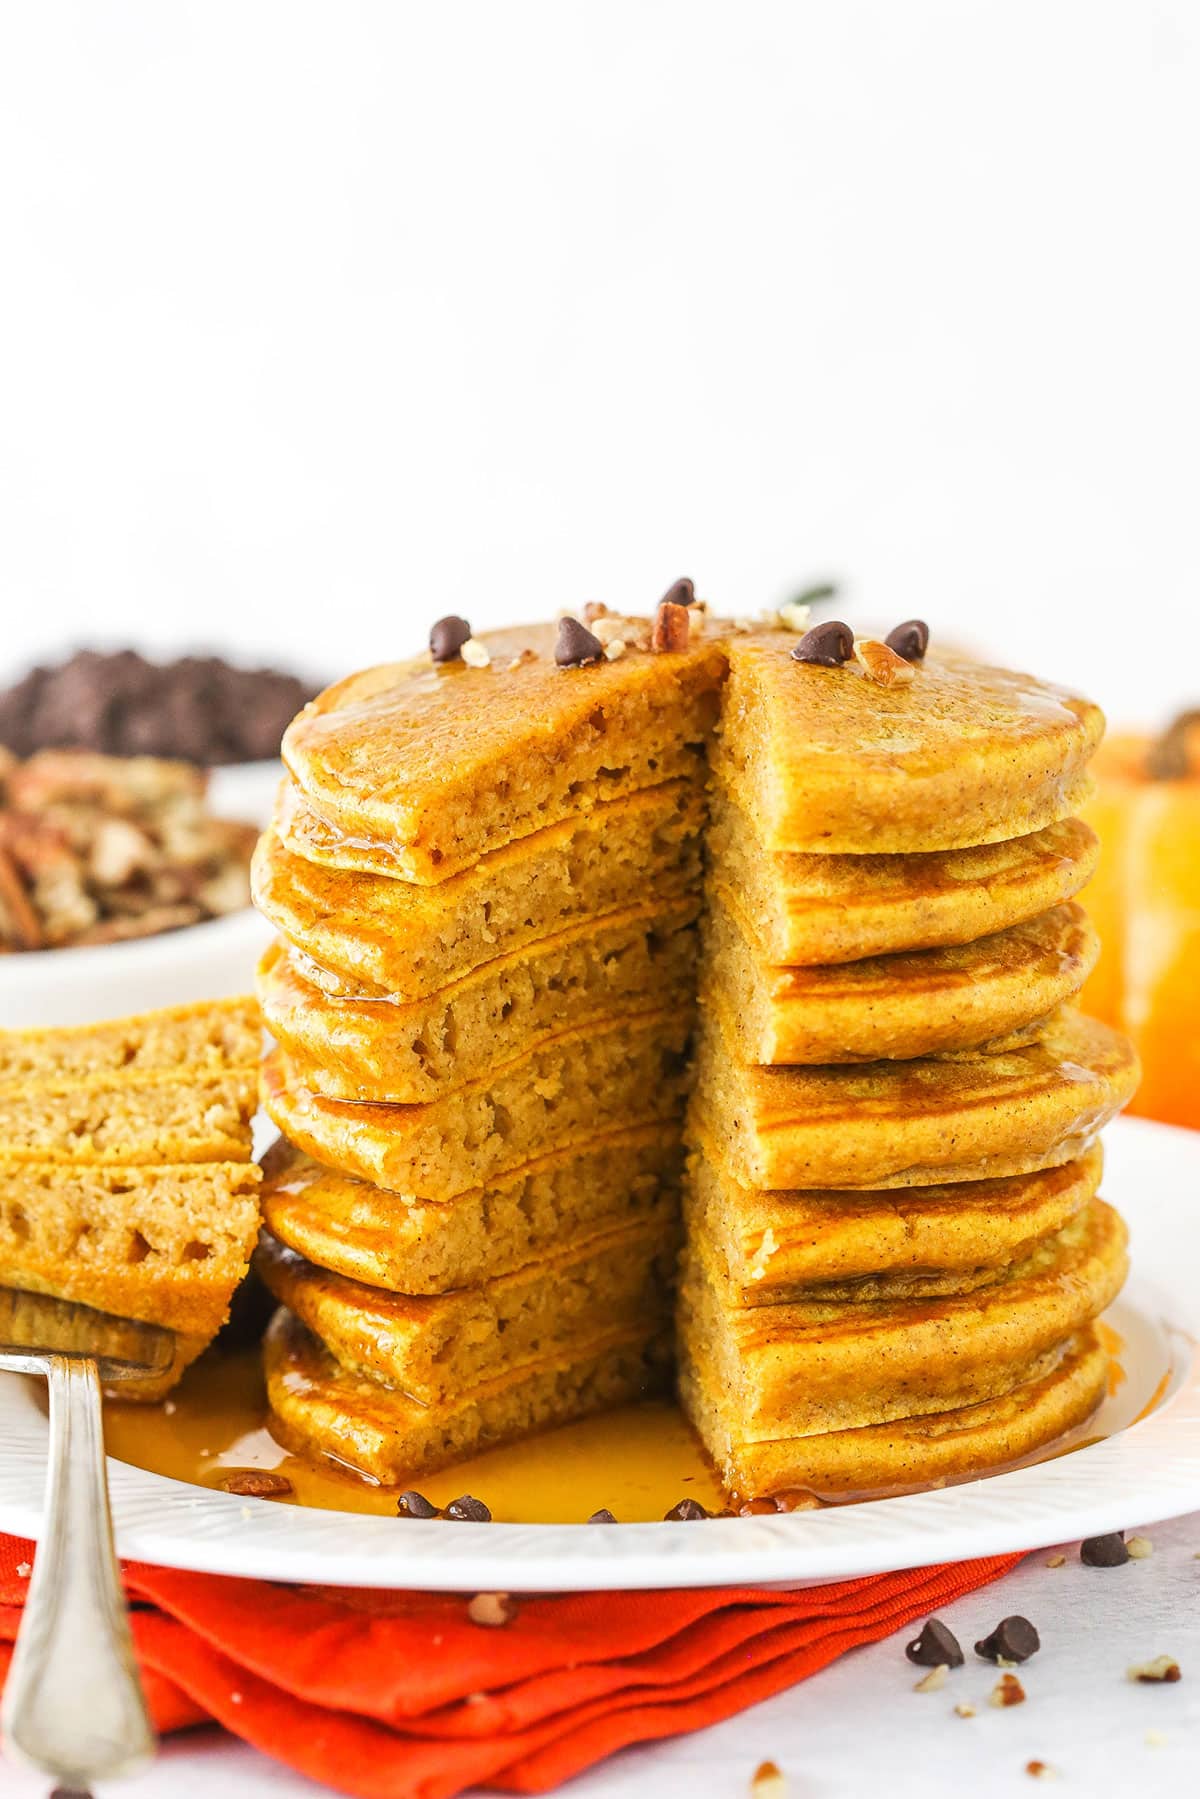 A stack of the fluffiest homemade pancakes made from scratch.